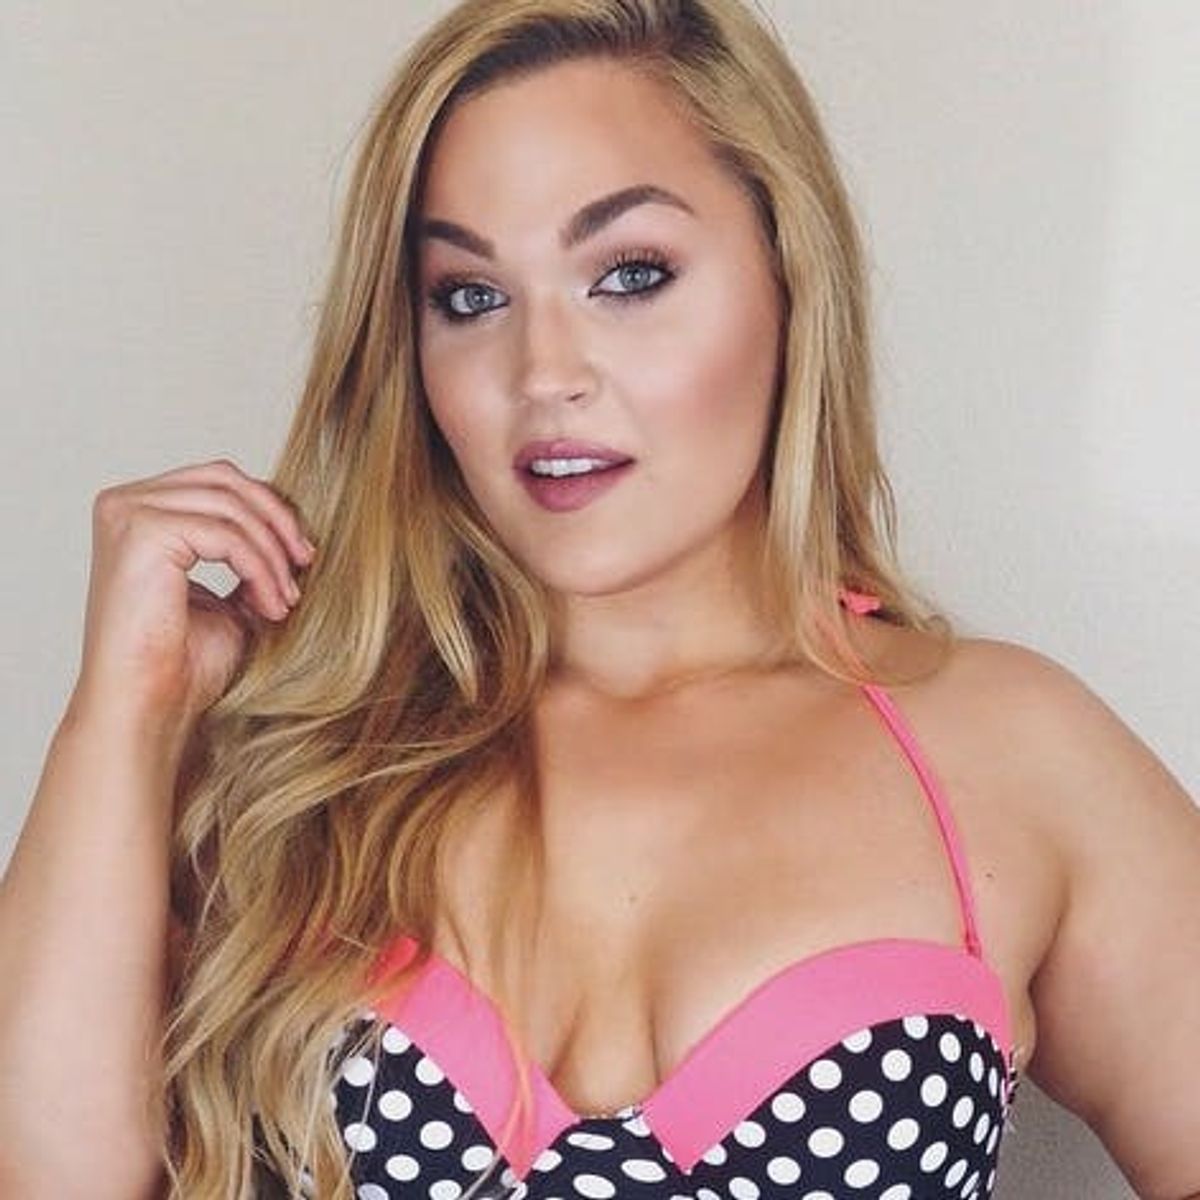 This YouTuber’s Response to Anti-Plus-Size Comments Is Inspiring